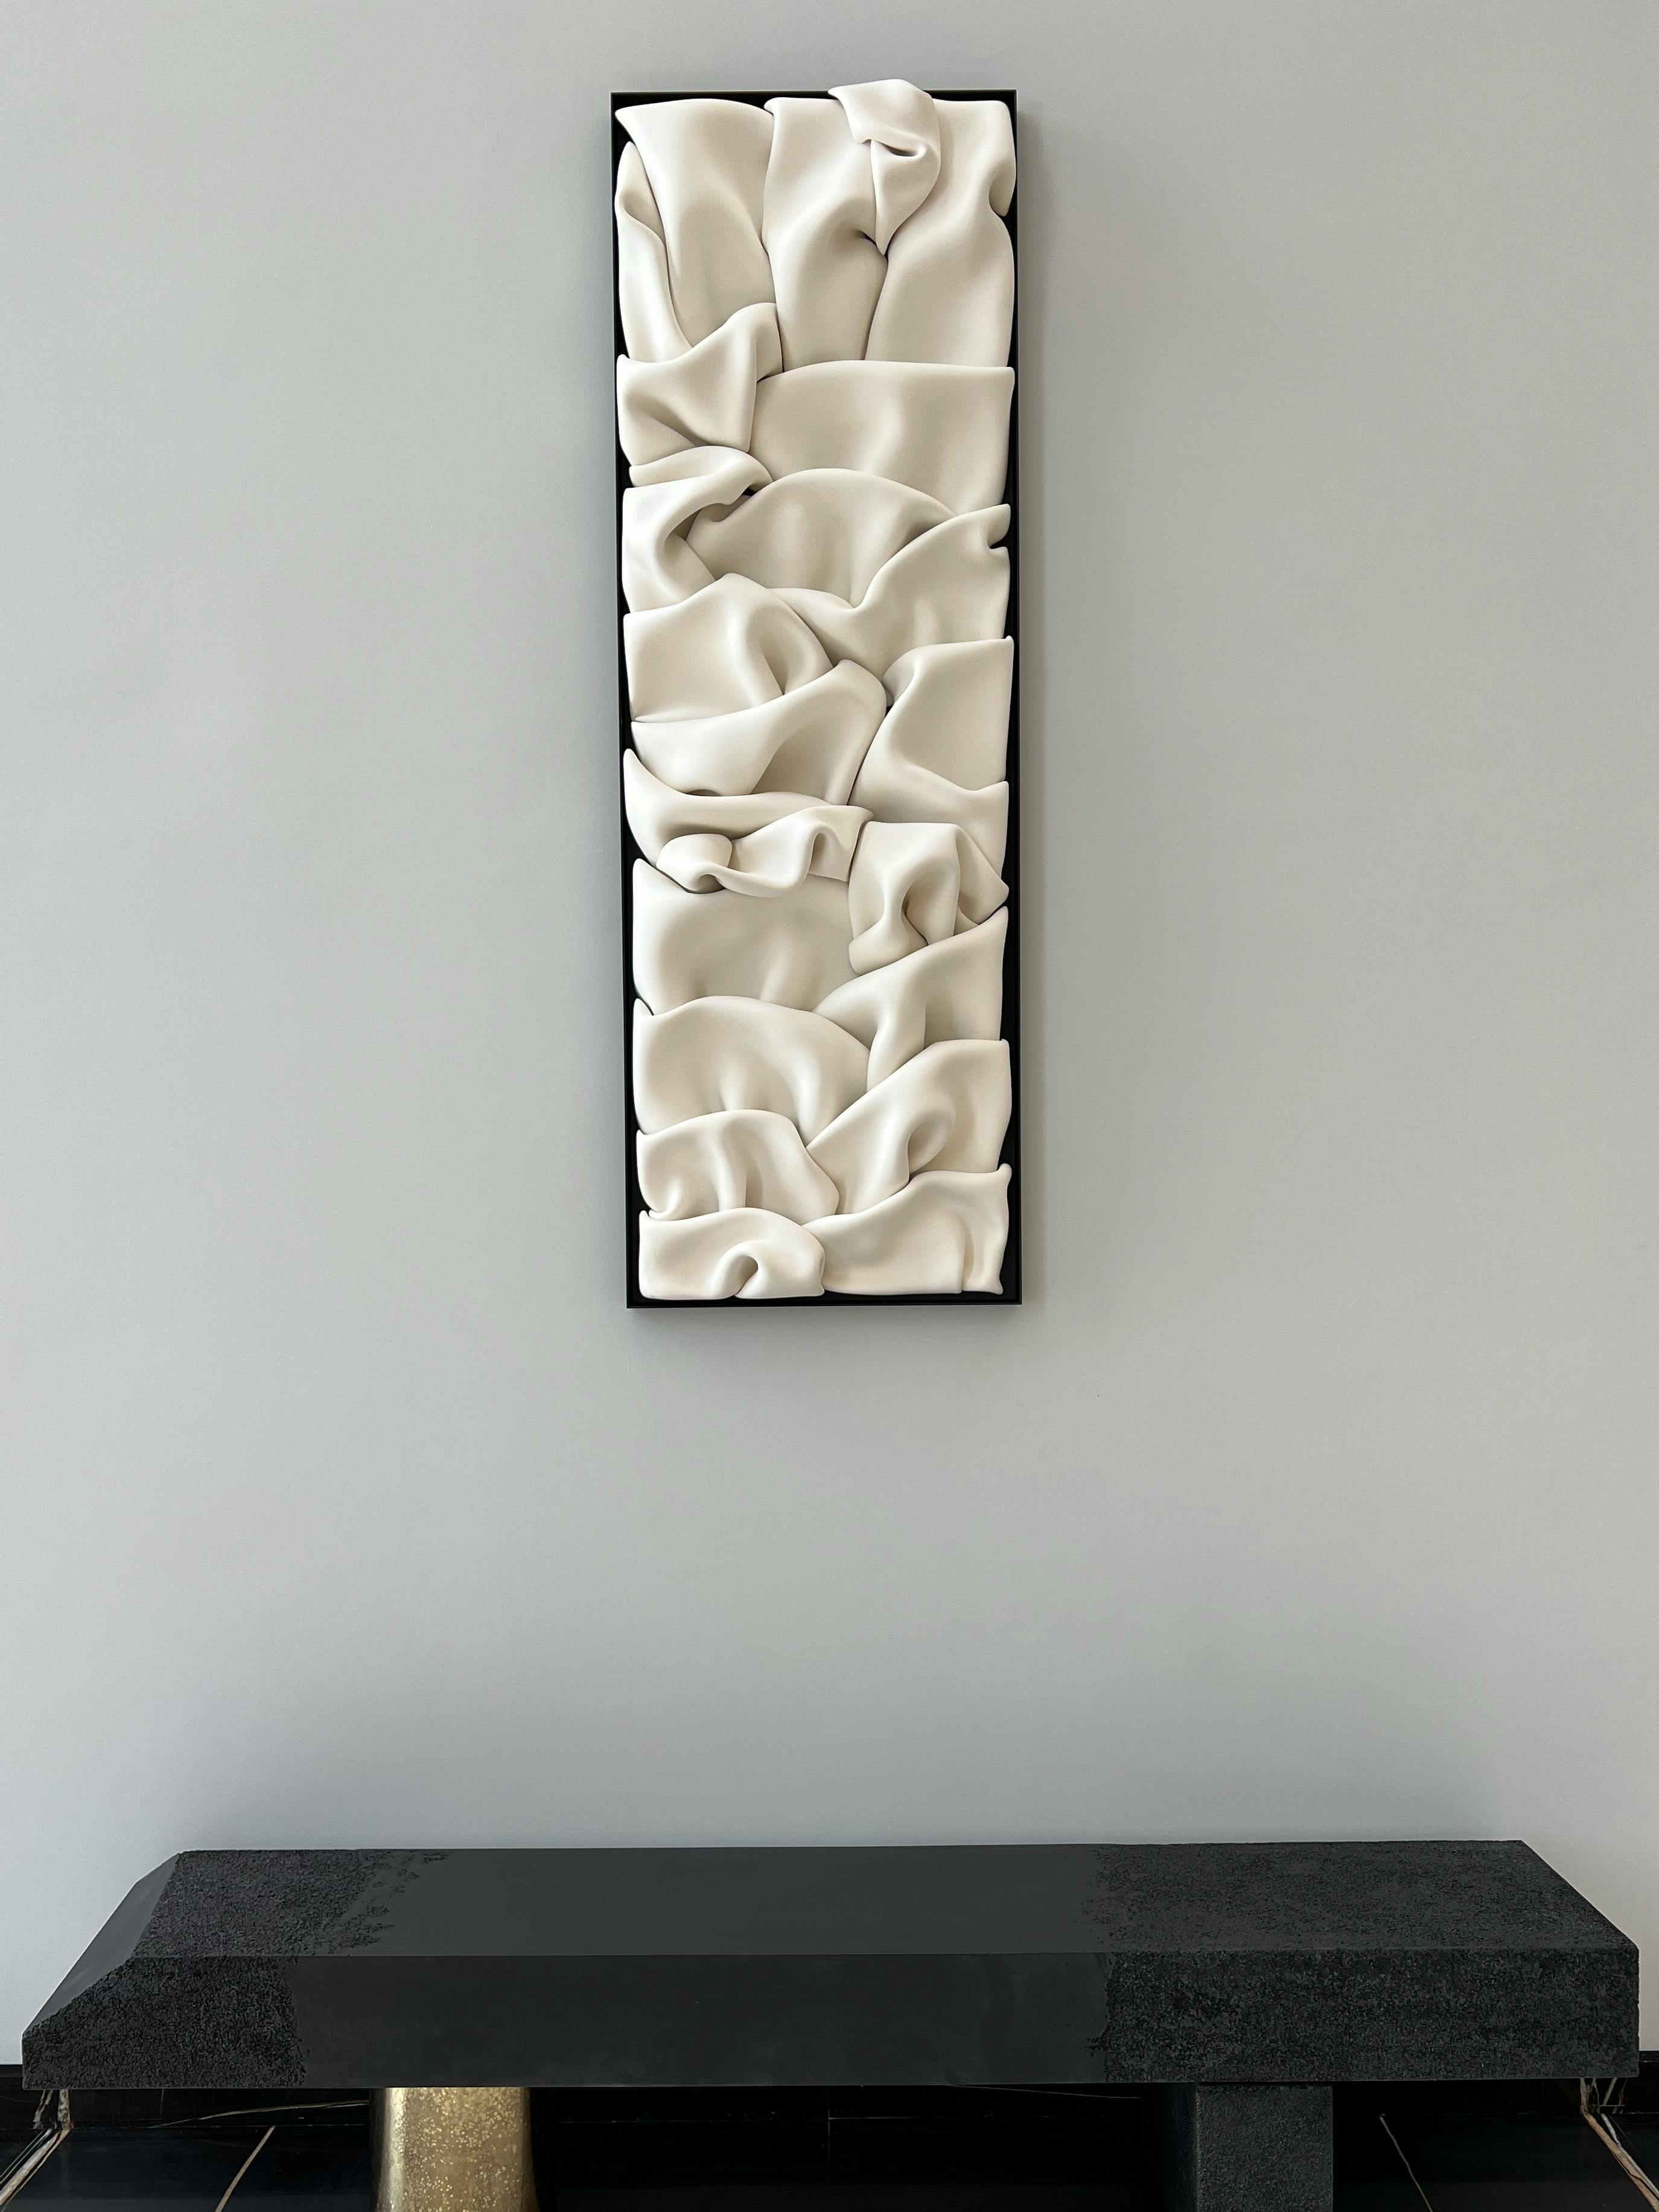 ceramic sculpture by jeannine marchand mounted on wall above bench